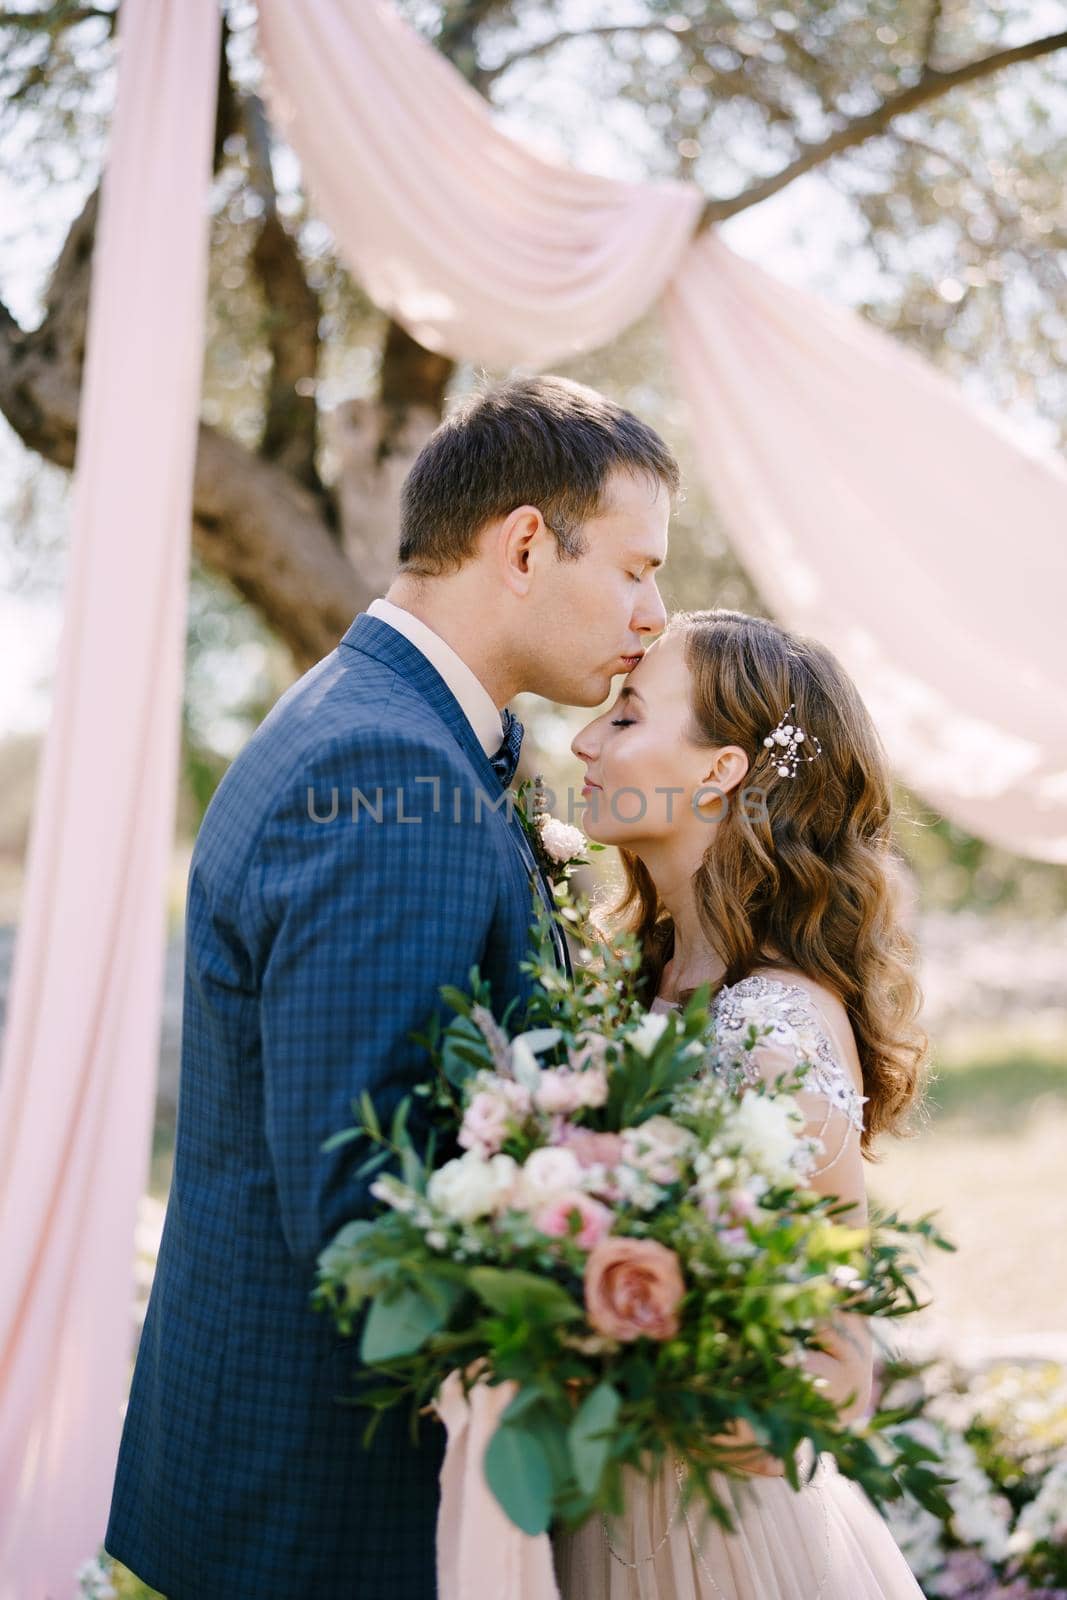 Groom kisses bride on the forehead with a bouquet of flowers under a tree. Portrait. High quality photo